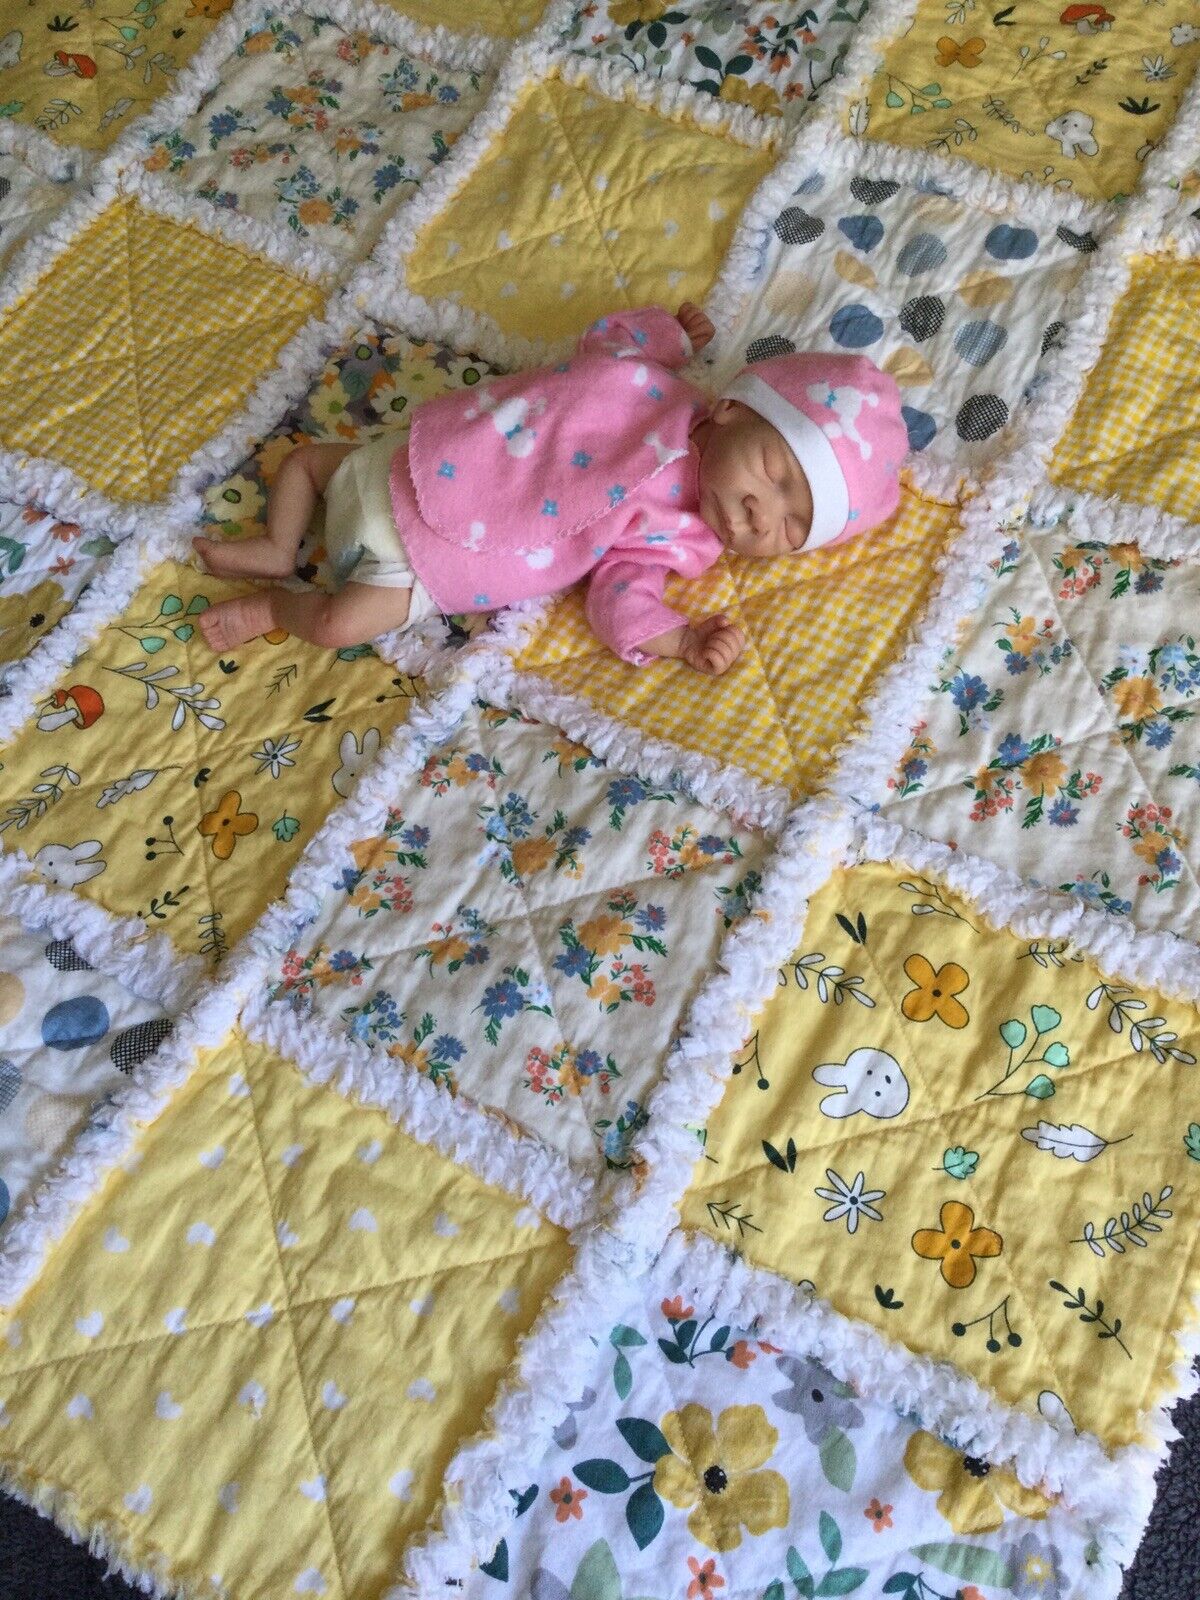 OOAK reborn baby doll flannel rag quilt yellow floral